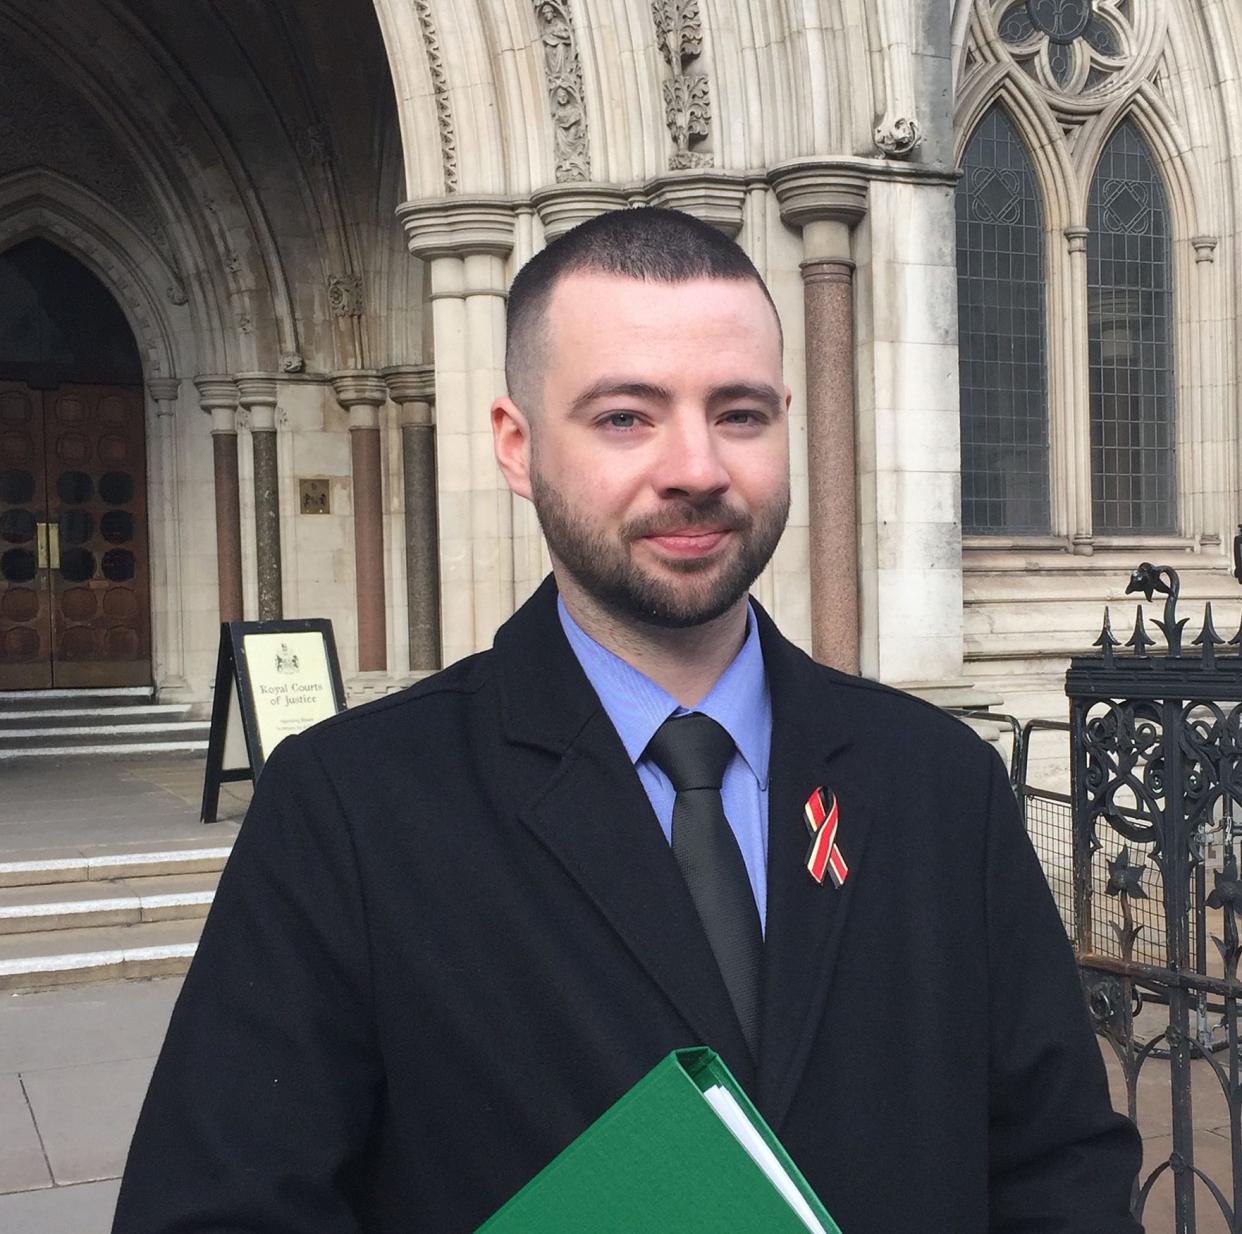 Jason Evans' father died in 1993 after being infected with both HIV and hepatitis C. His son is now the director of the campaign group